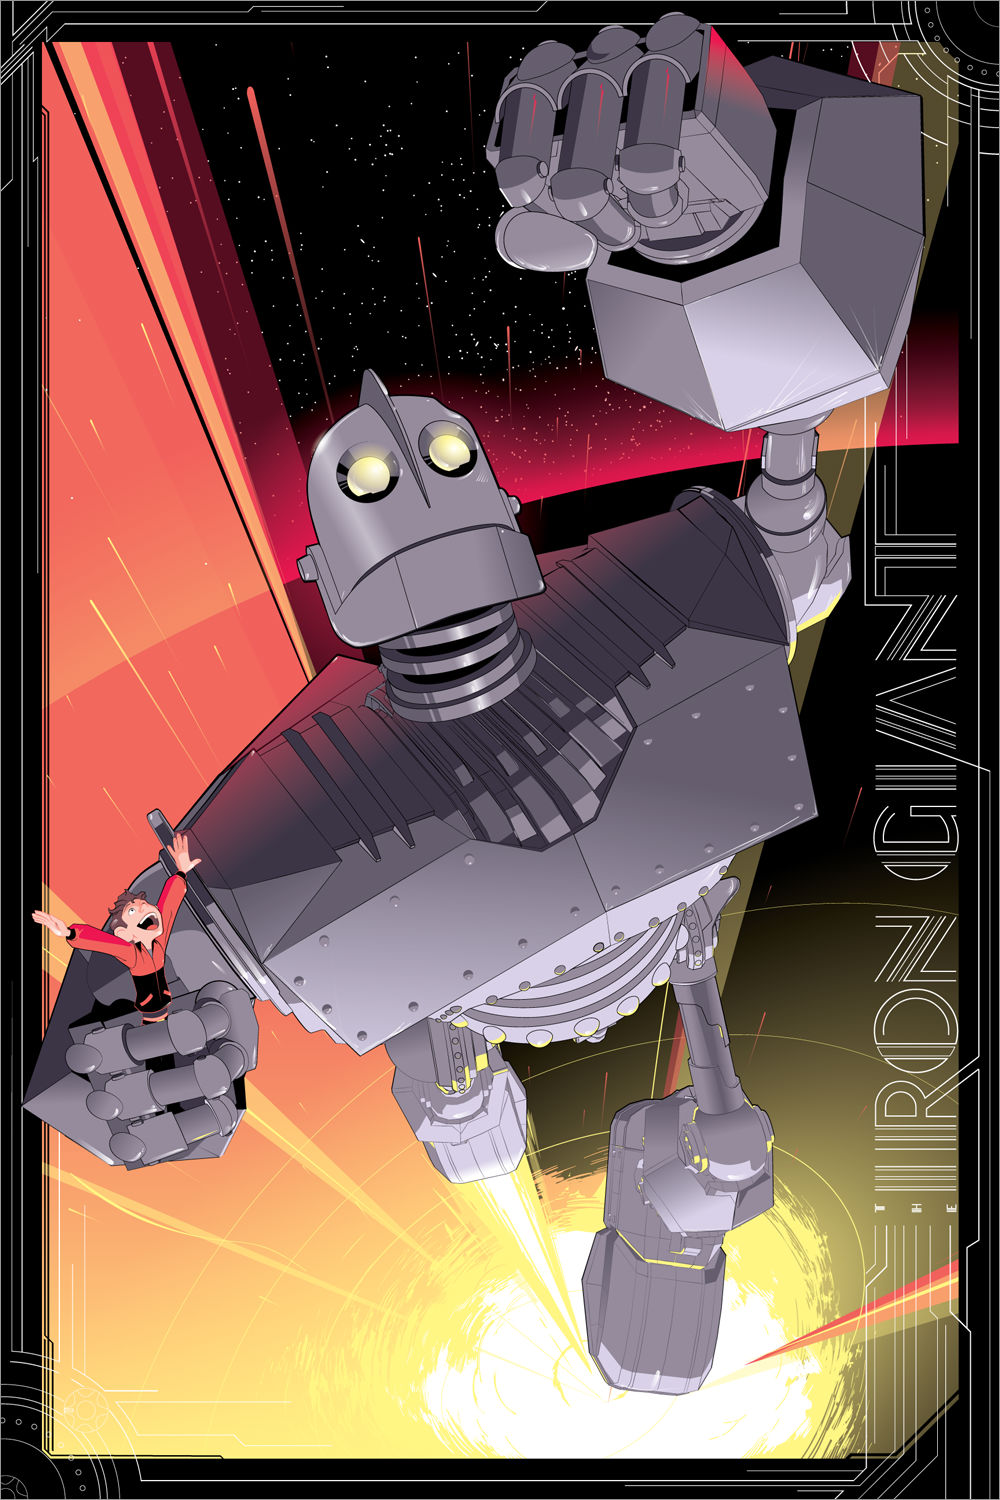 The Iron Giant Will Pop Off Your Wall In This Vibrant New Poster